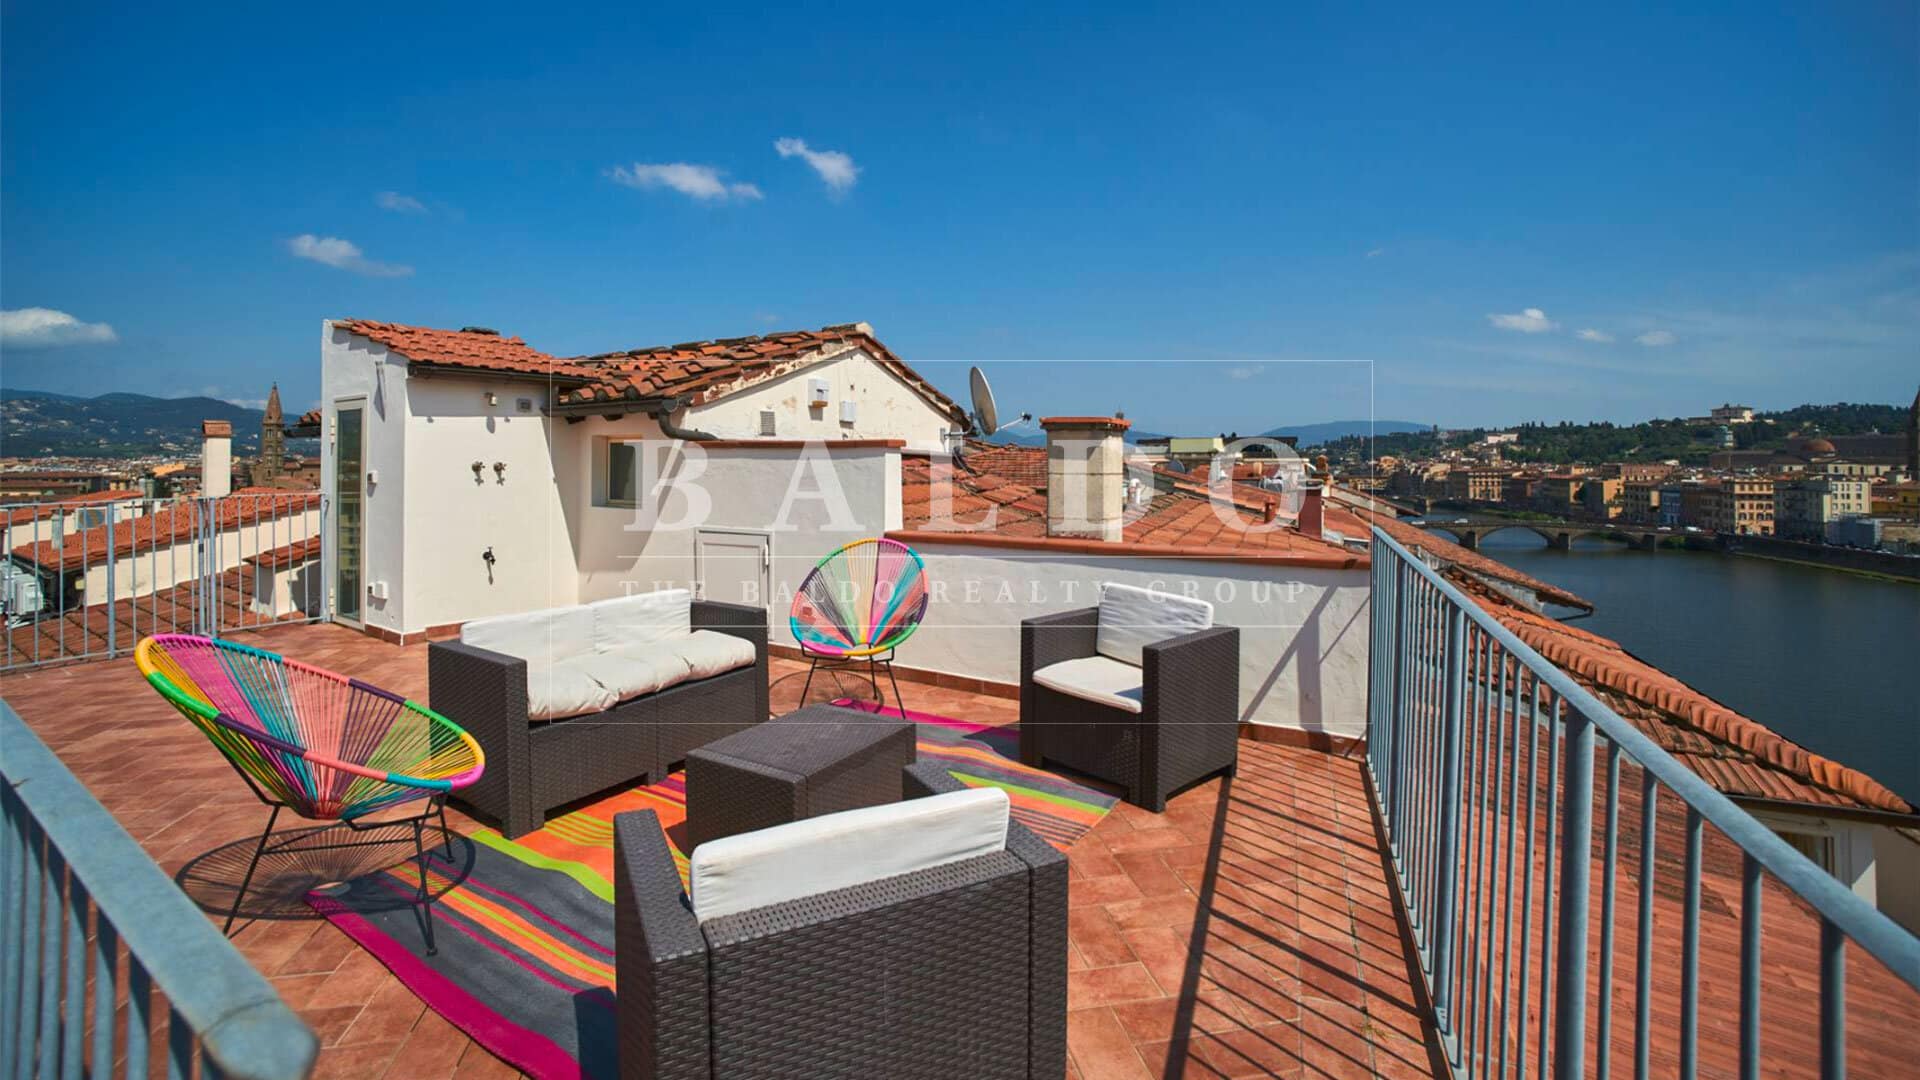 AMAZING 170 M² PROPERTY WITH TERRACES IN FLORENCE | LUNGARNO VESPUCCI - Photo 1